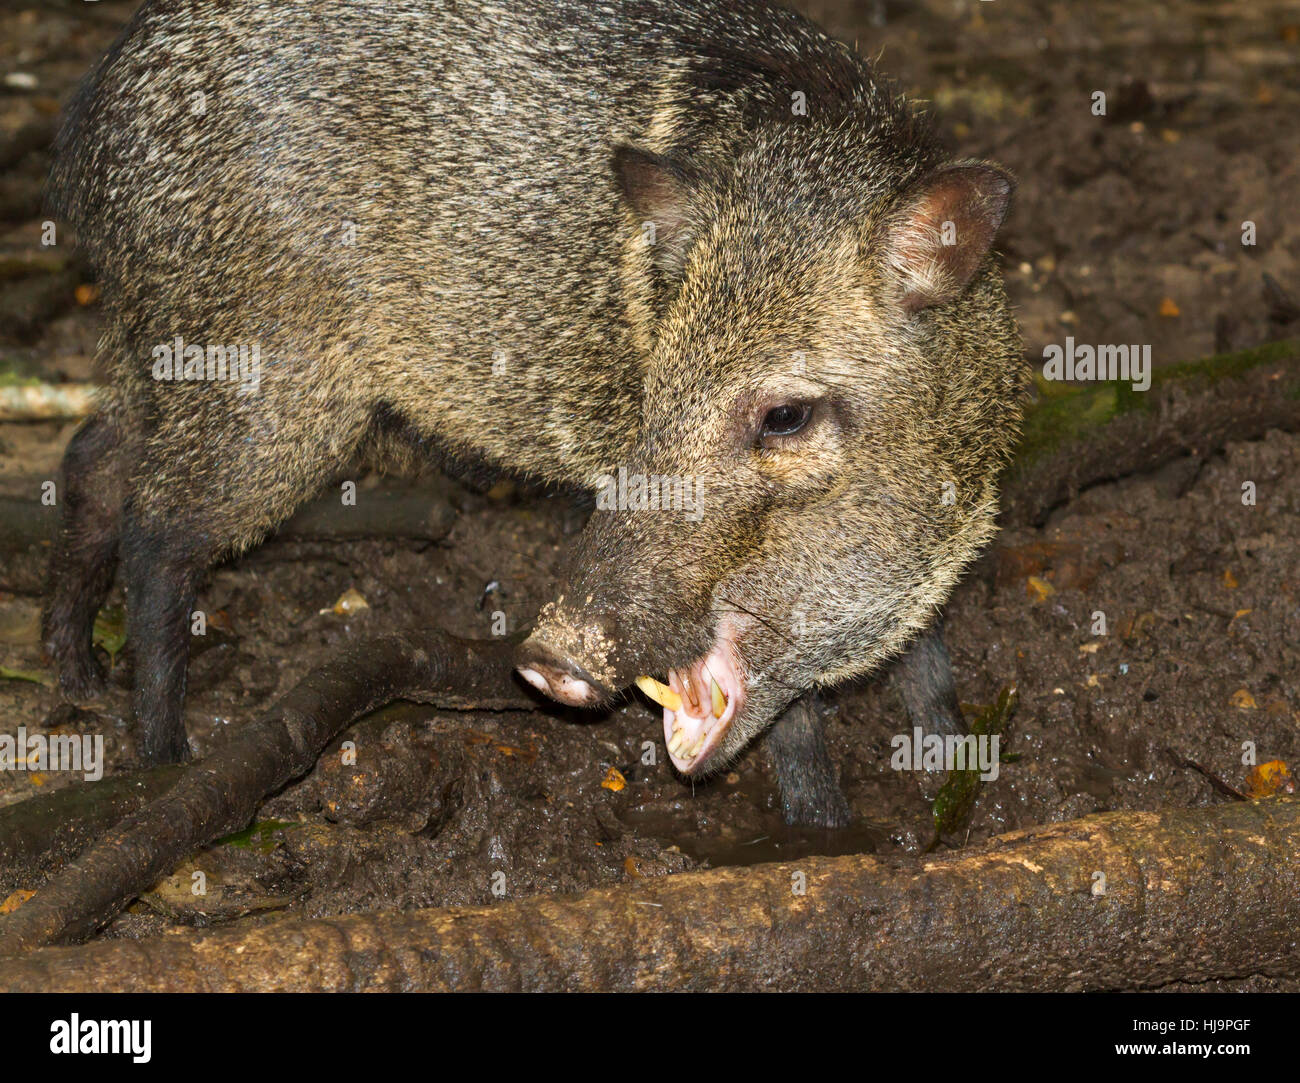 The collared peccary at tropical forest, Belize, Central America Stock Photo